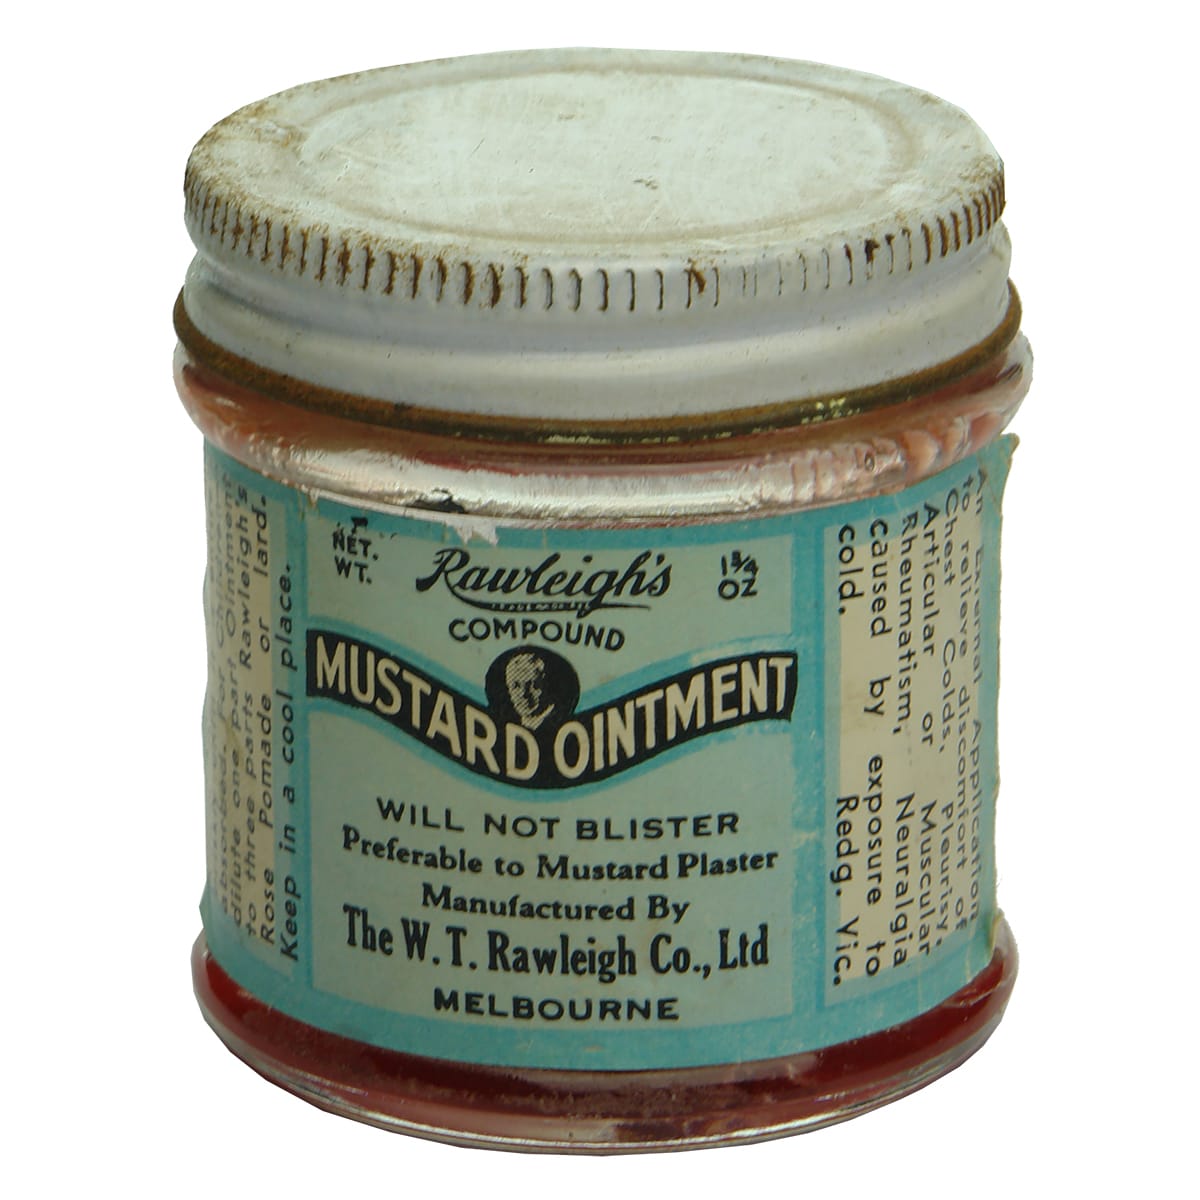 Pharmacy. Rawleigh's Mustard Ointment, Melbourne. (Victoria)